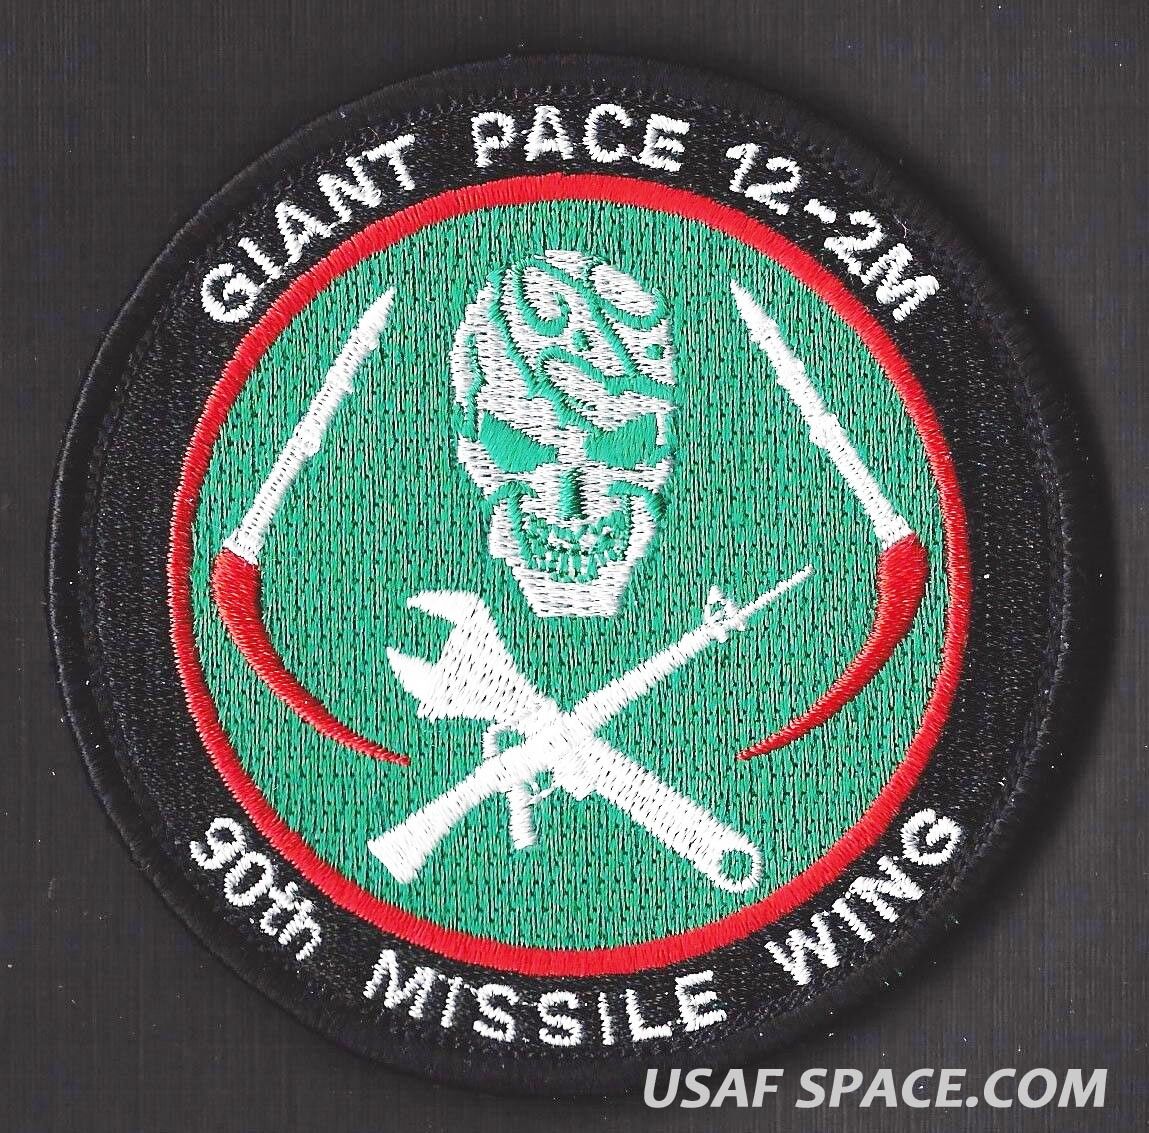 USAF 90th MISSILE WING -GIANT PACE 12-2M -Peacekeeper- Warren AFB ORIGINAL PATCH